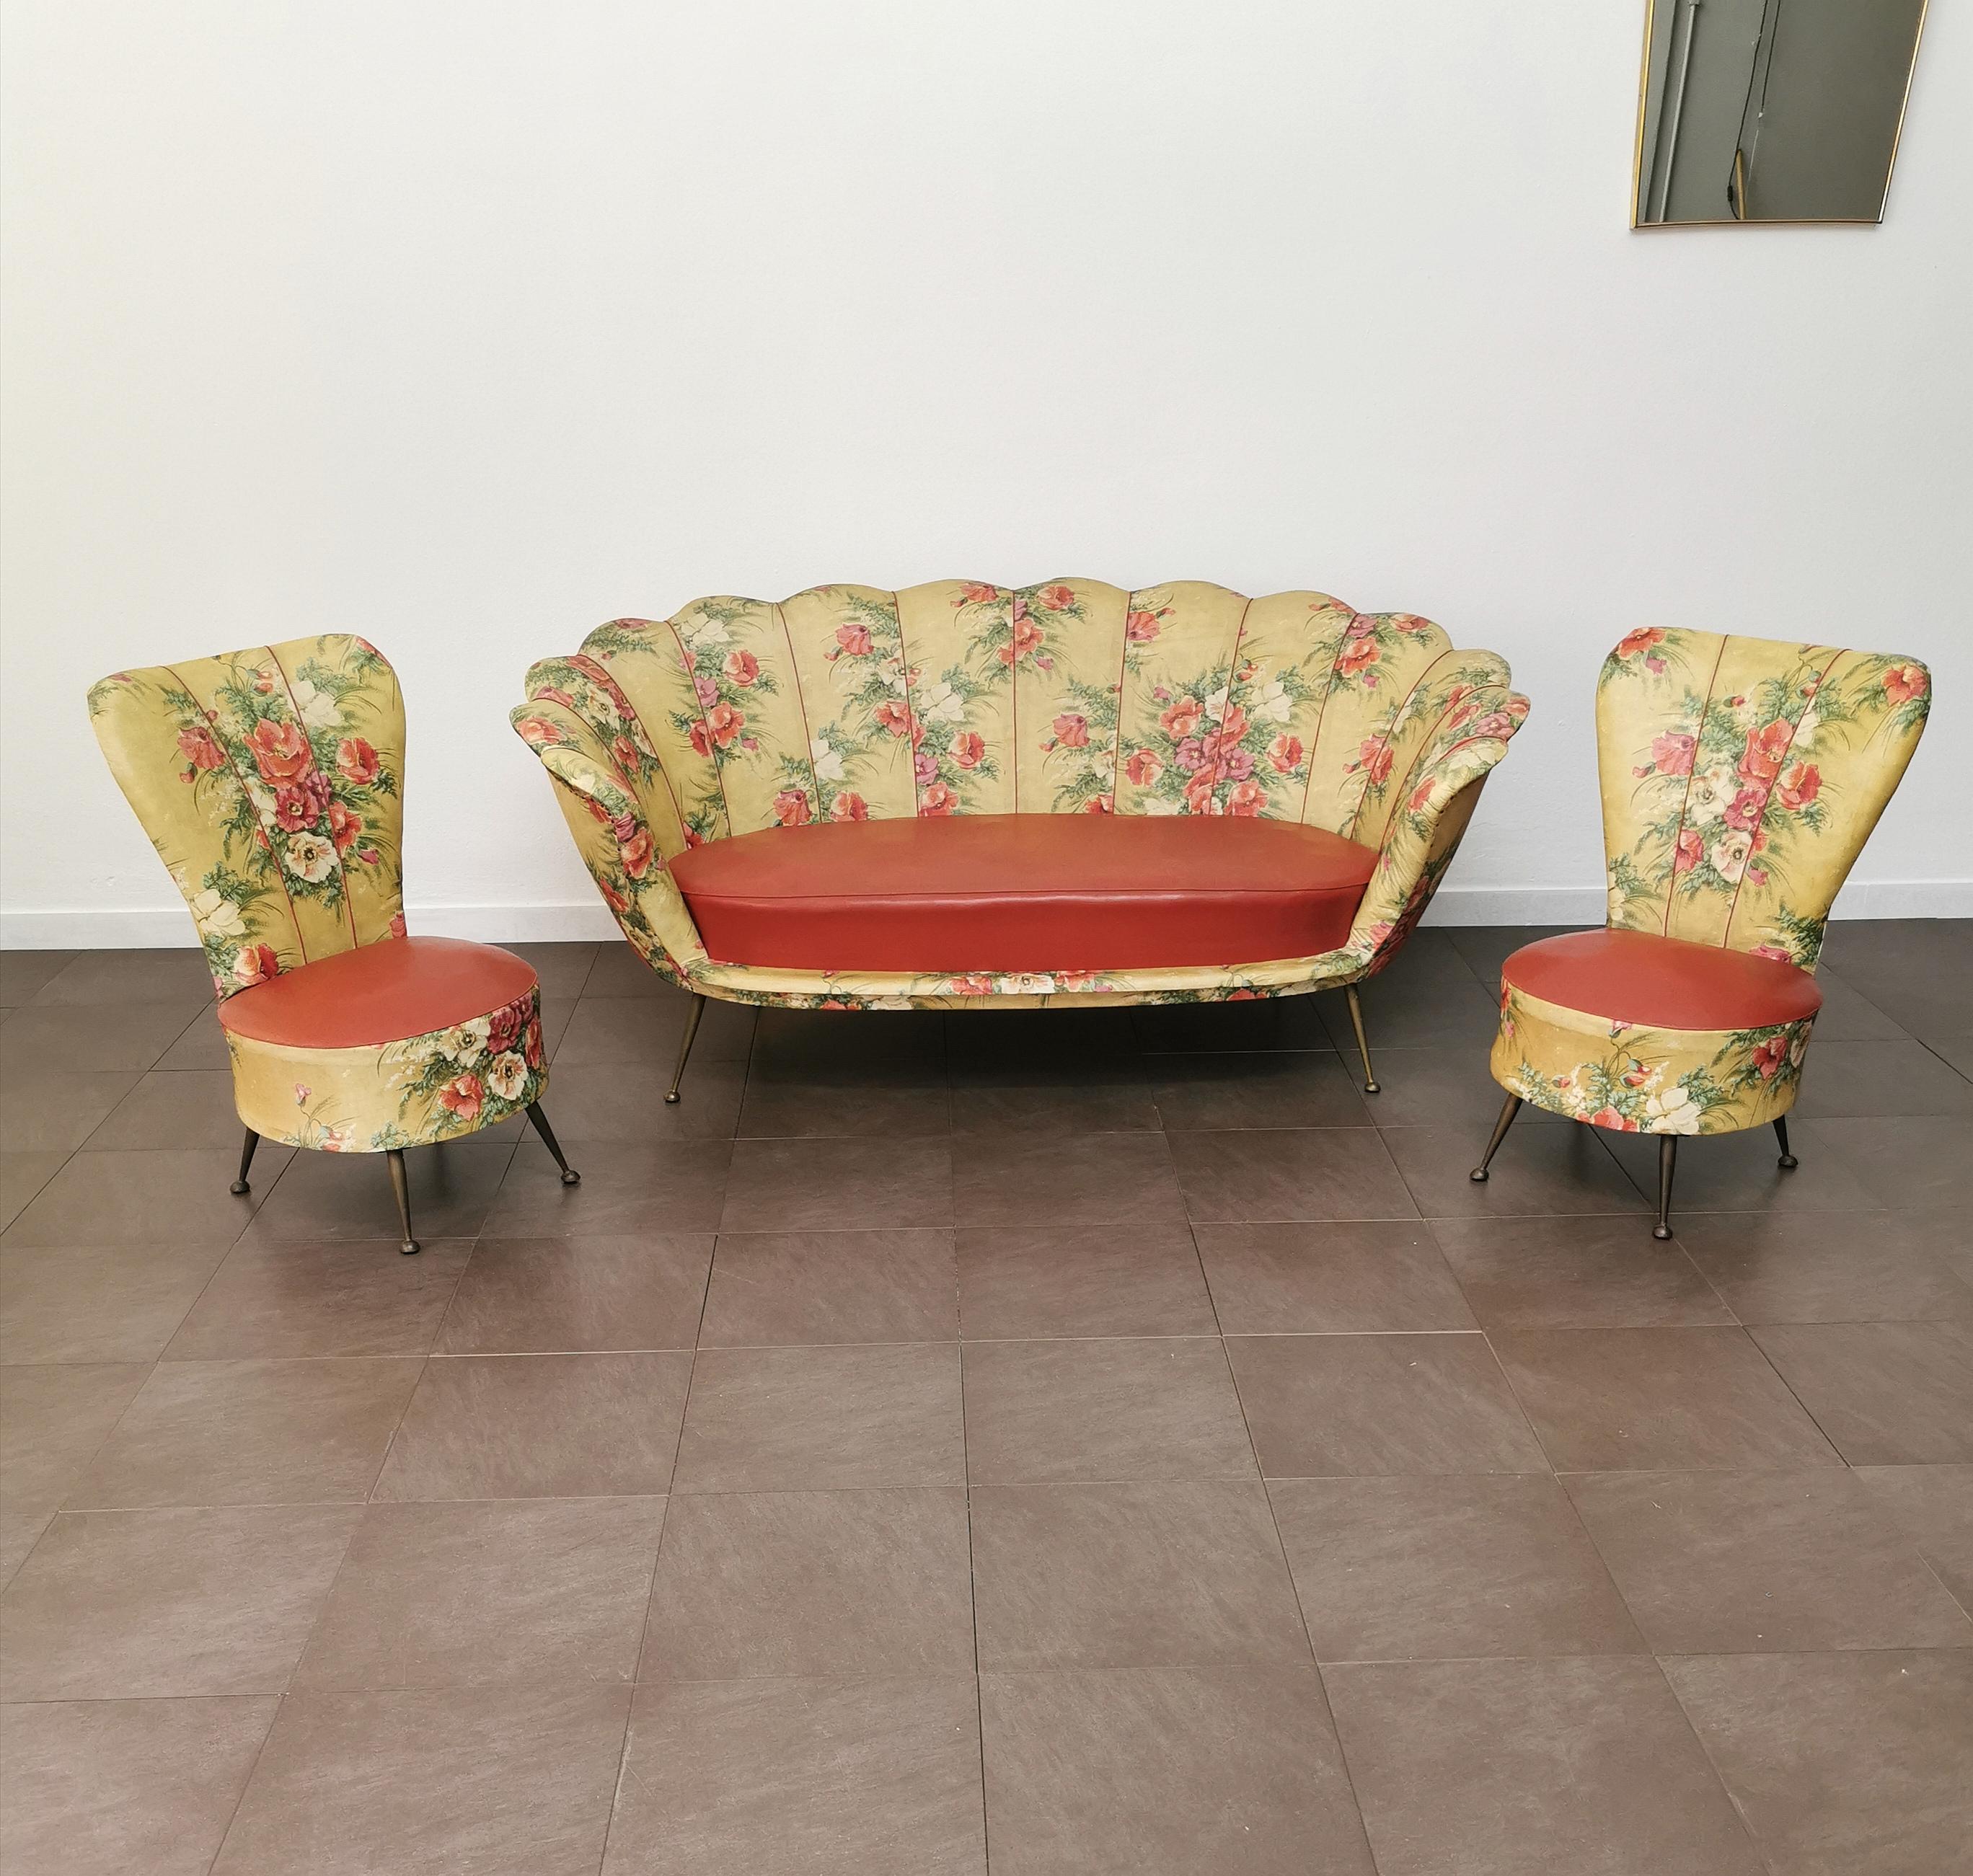 Set of 2 small living room armchairs and 1 sofa made in Italy in the 1950s. The set was made with a synthetic oilcloth cover with floral pattern, seat in red eco-leather and 4 brass pin feet.